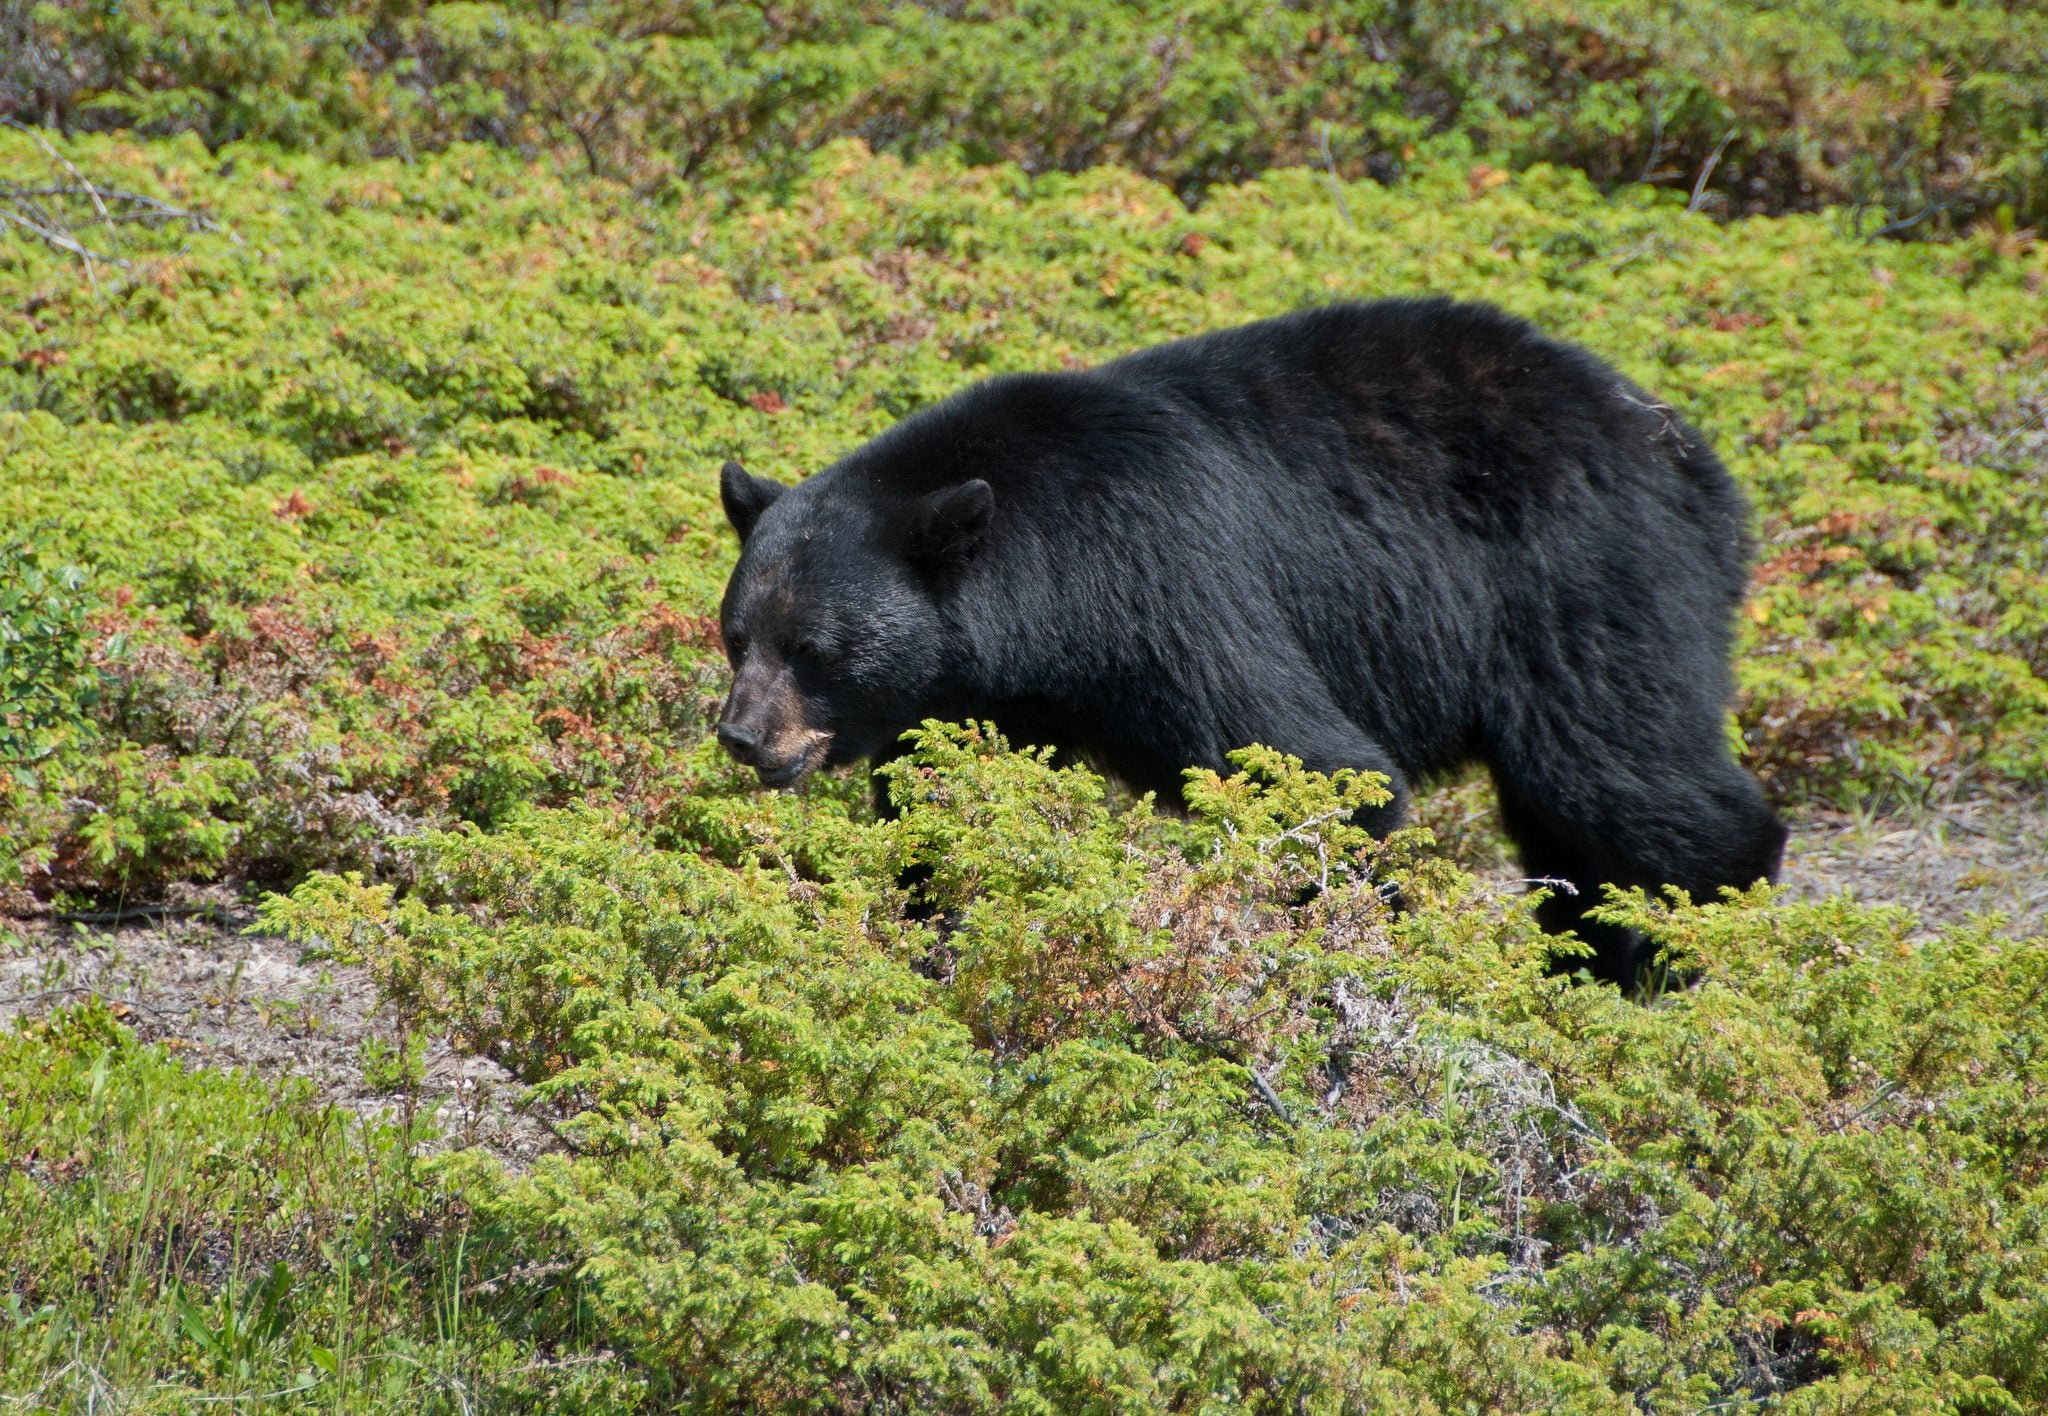 Grizzly bear surrounded by green plants